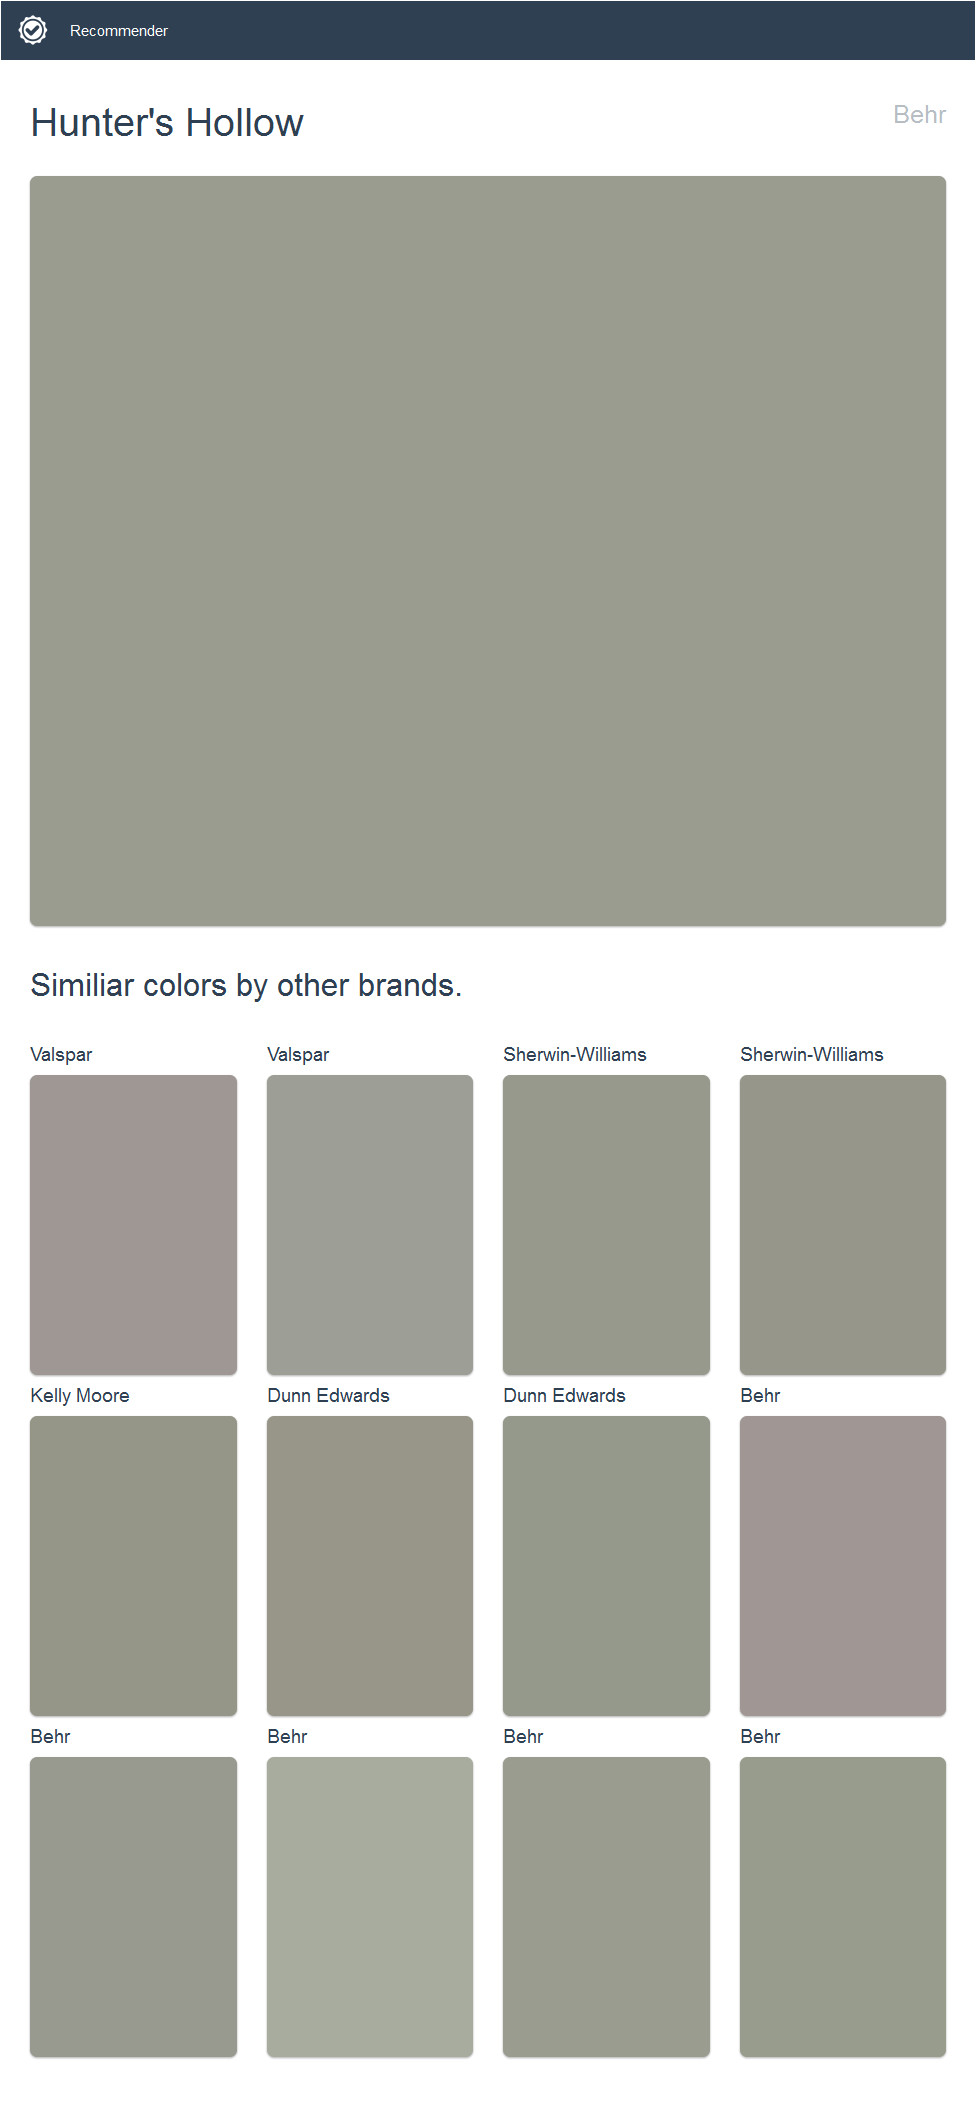 hunter s hollow behr click the image to see similiar colors by other brands